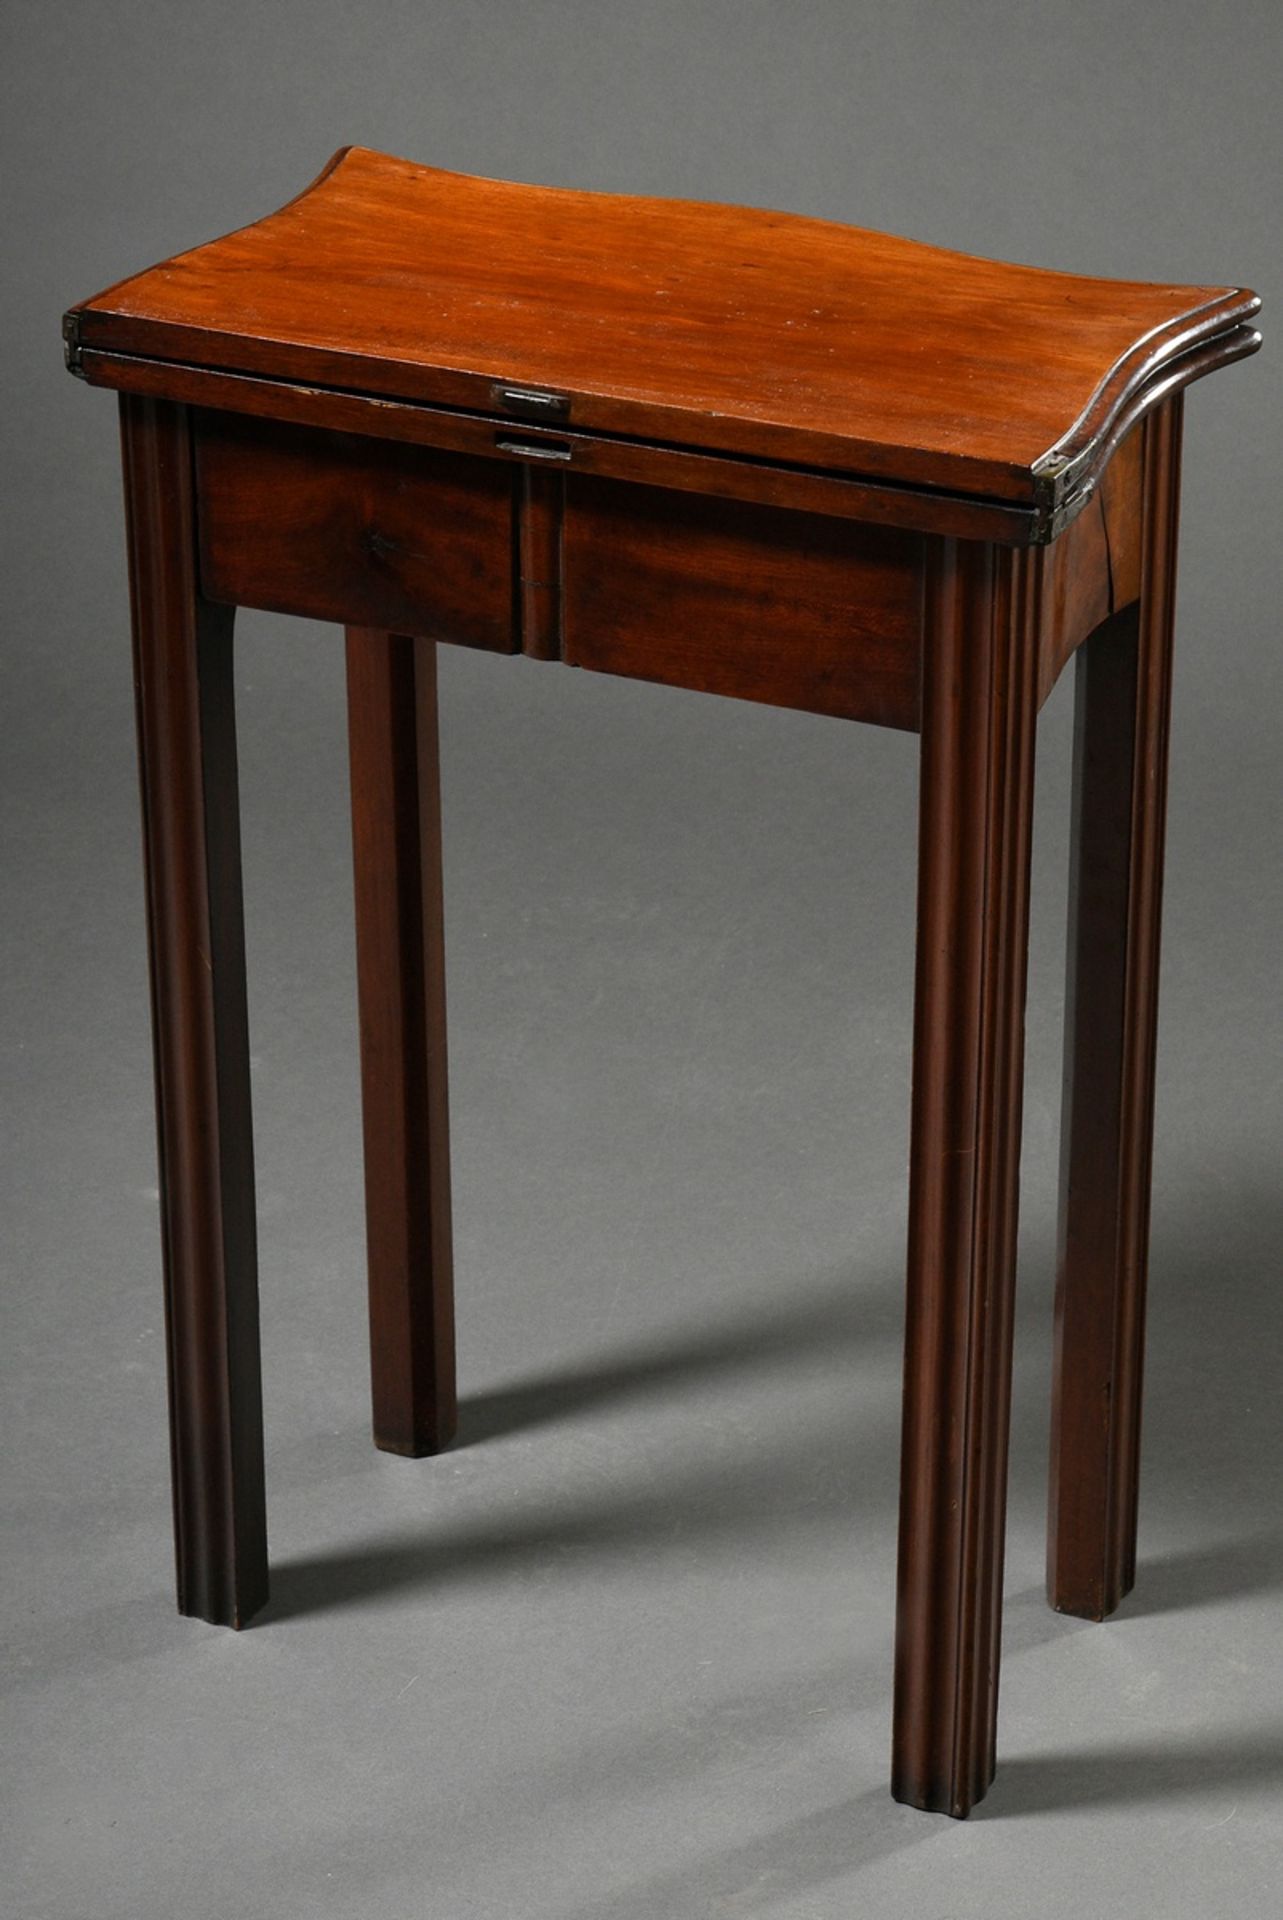 Small English mahogany folding table with straight legs, 70,5x48x27/53,5cm, 19th c. - Image 2 of 4